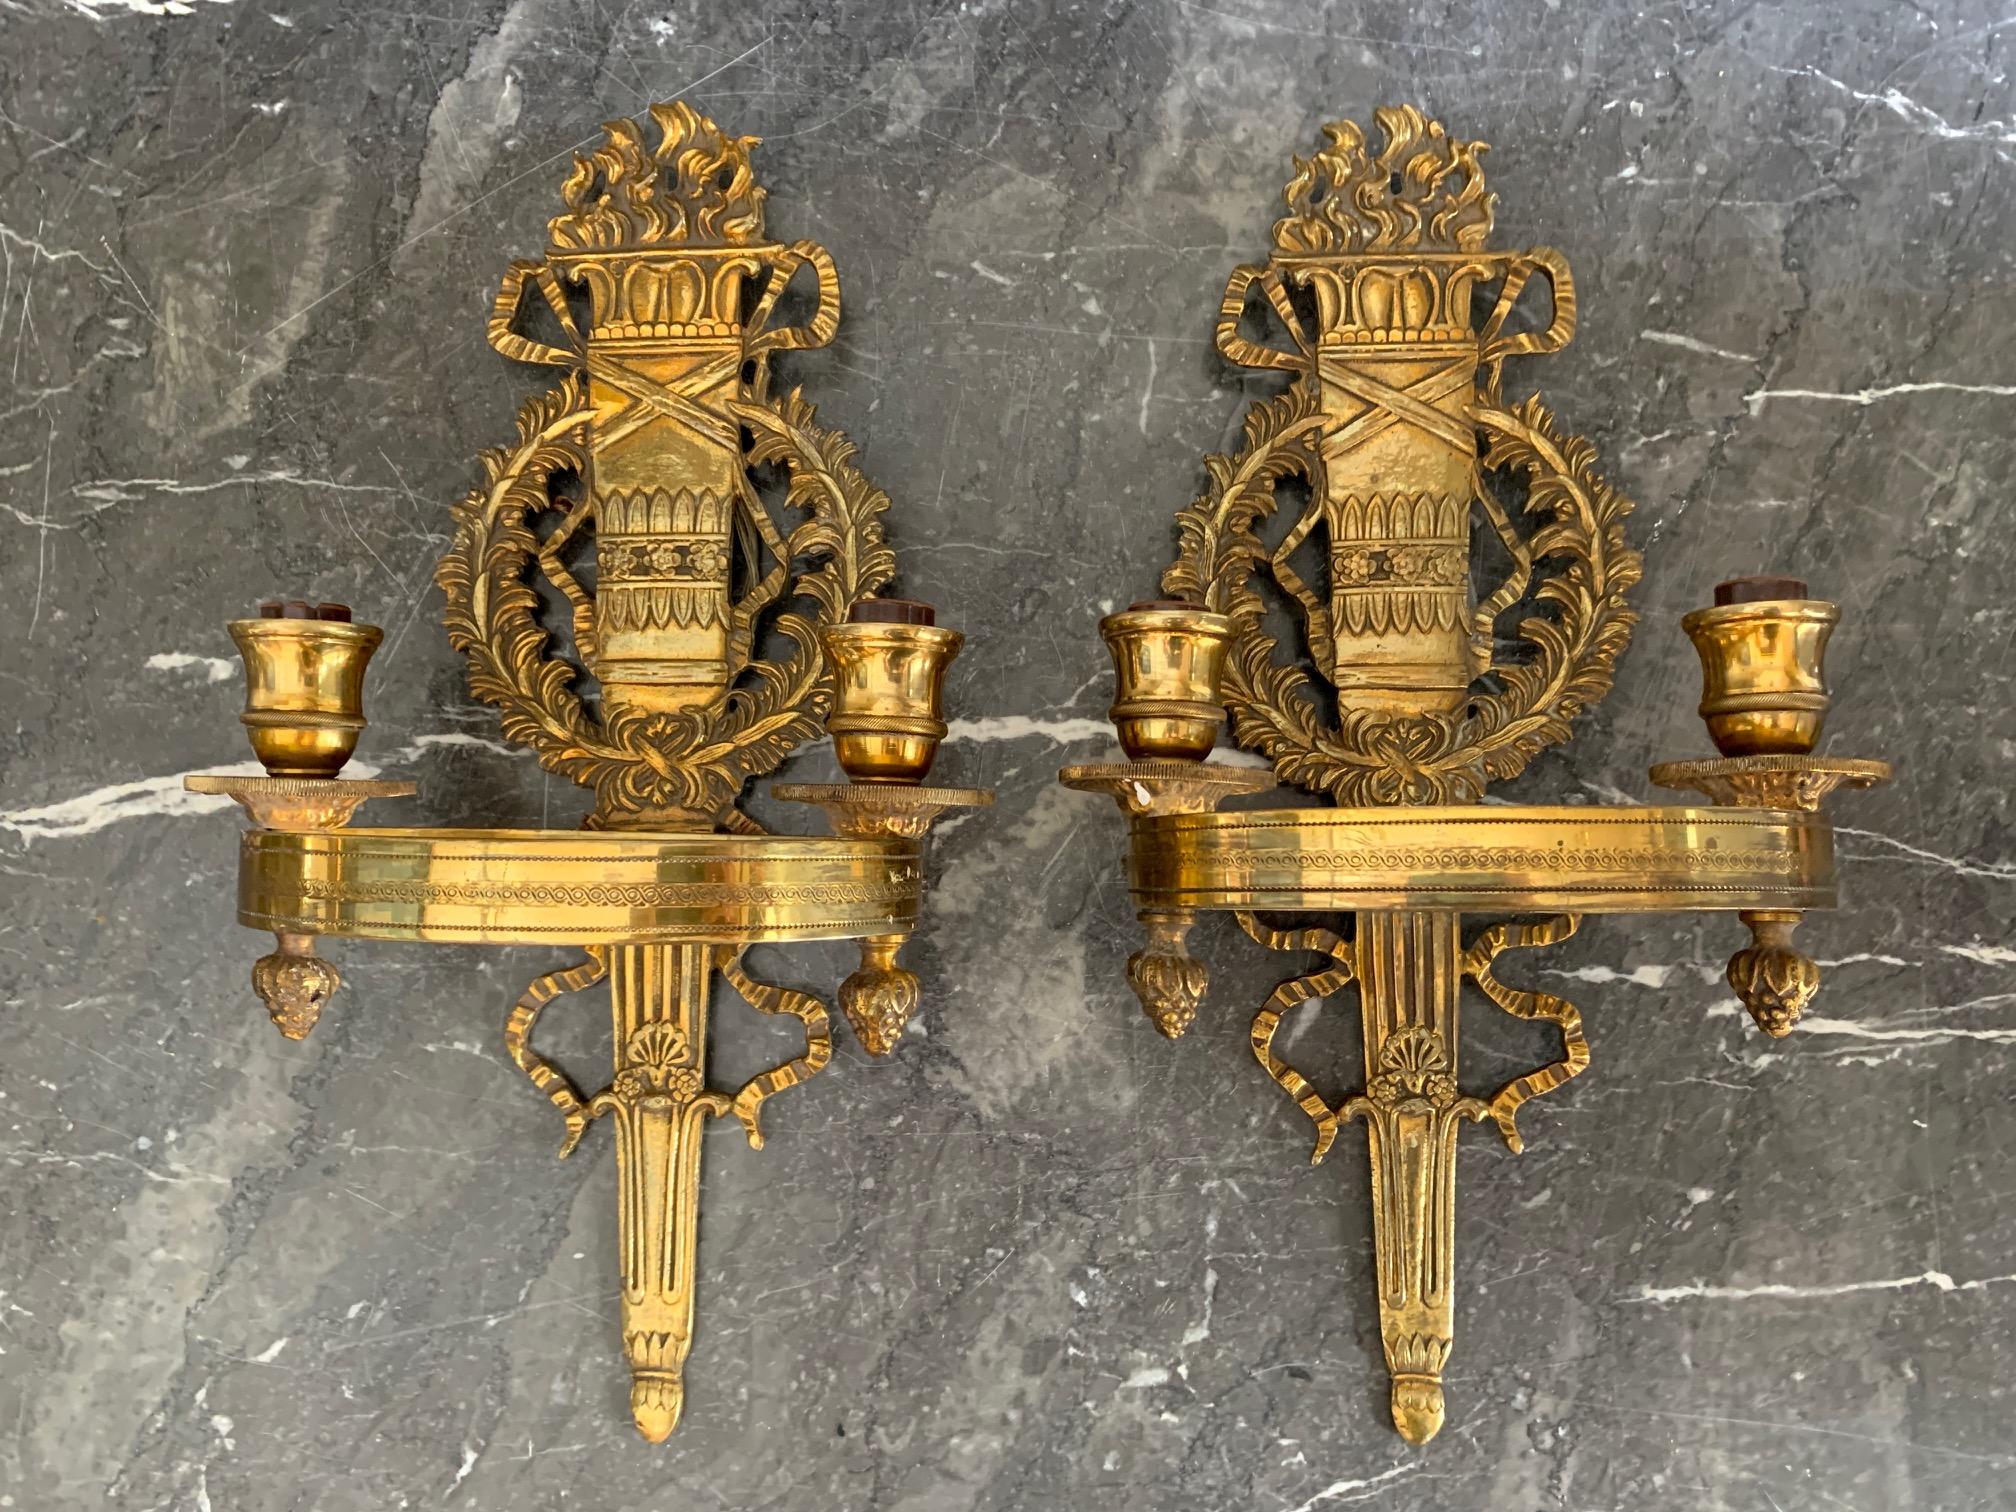 Pair of nicely detailed French Empire bronze style two-arm wall sconces with central flame and torch motif.